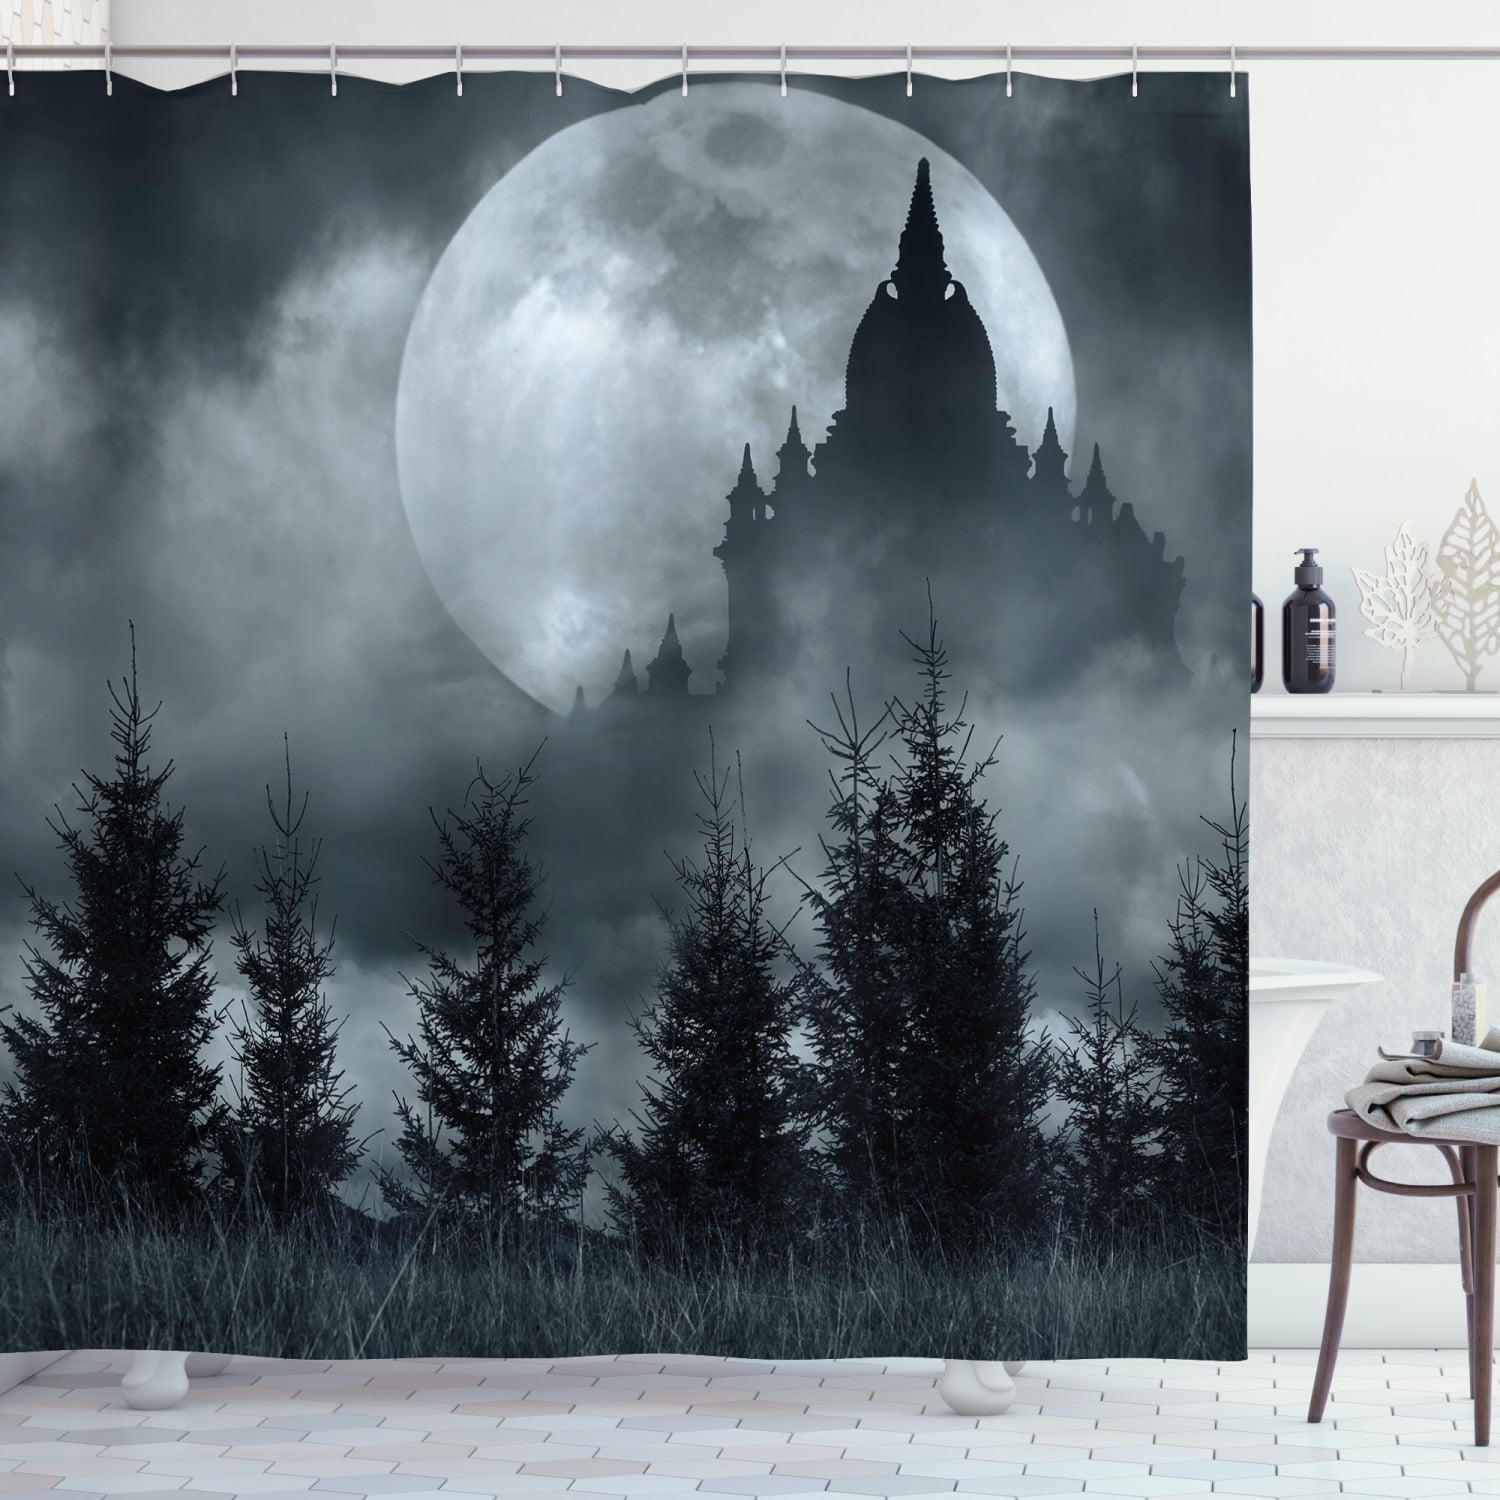 Winter Lake Snow Forest Shower Curtain Bathroom Decor Fabric & 12hooks 71x71in 